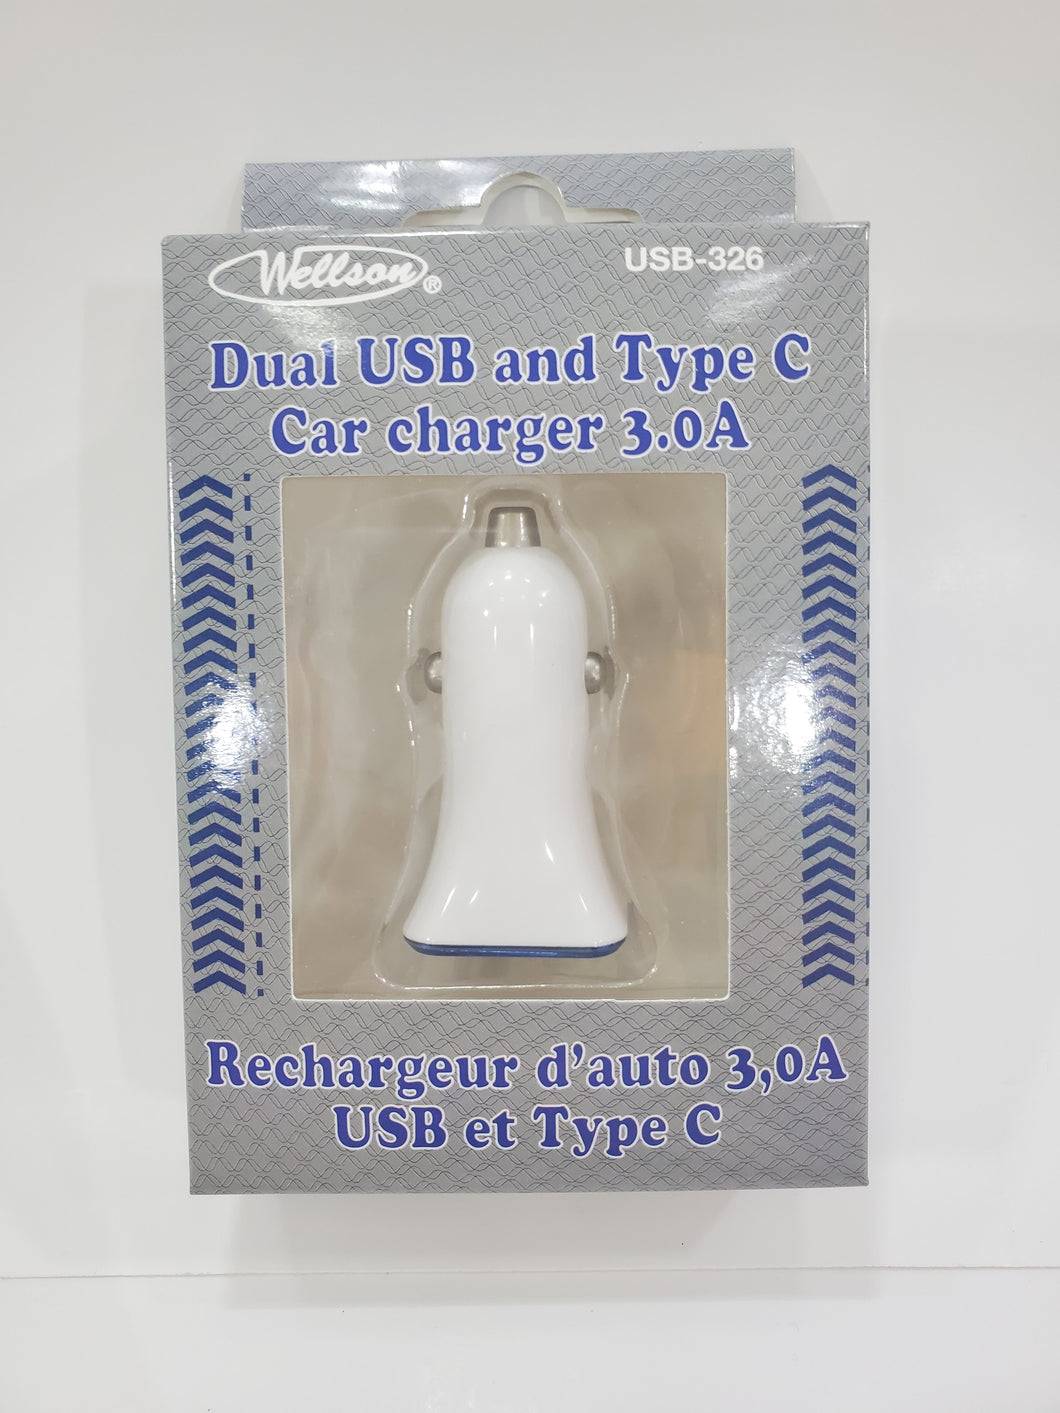 WELLSON Dual USB and Type C Car Charger - USB-326